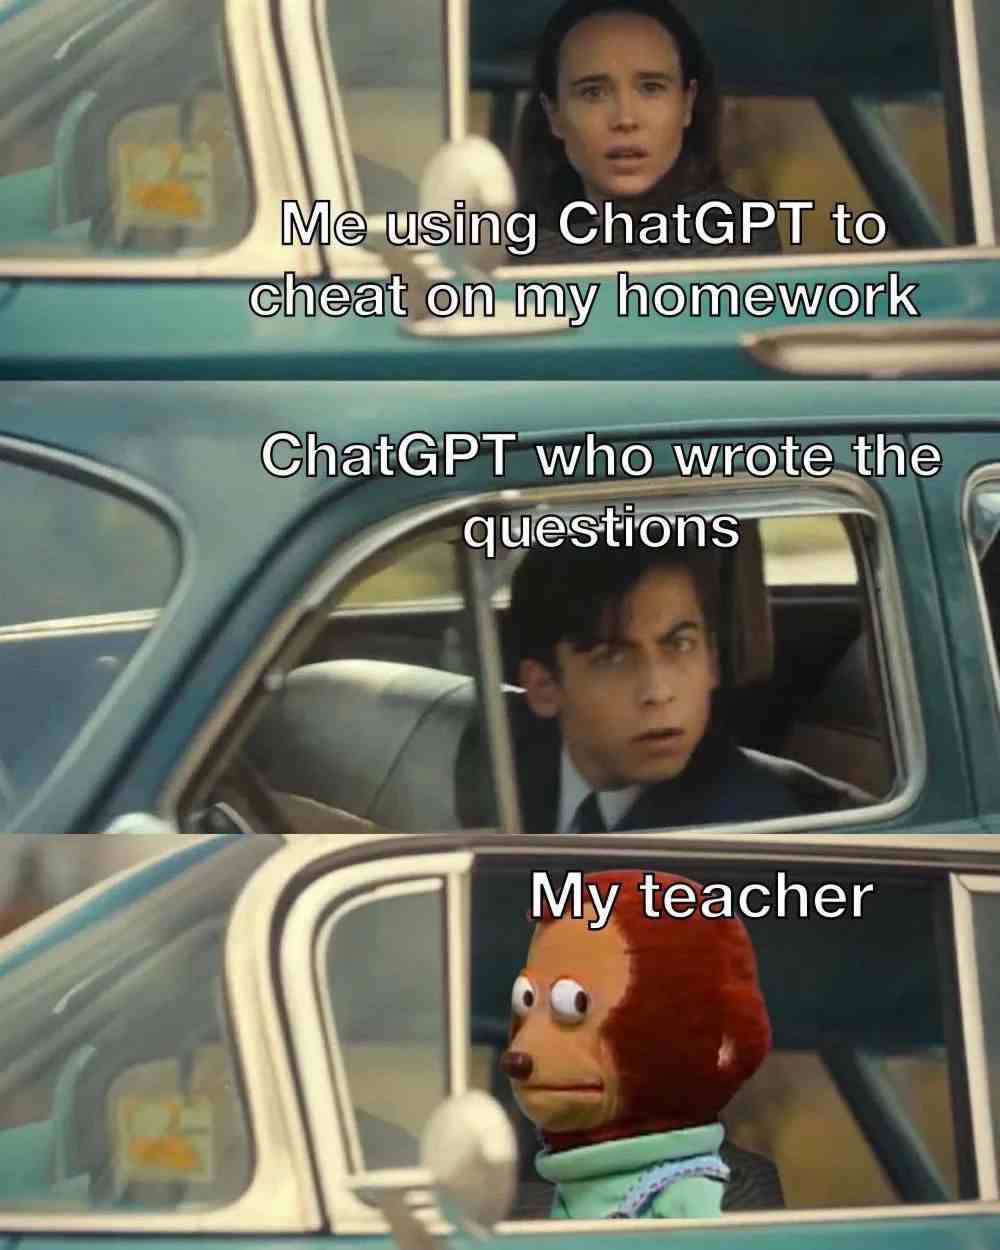 Me using ChatGPT to cheat on my homework